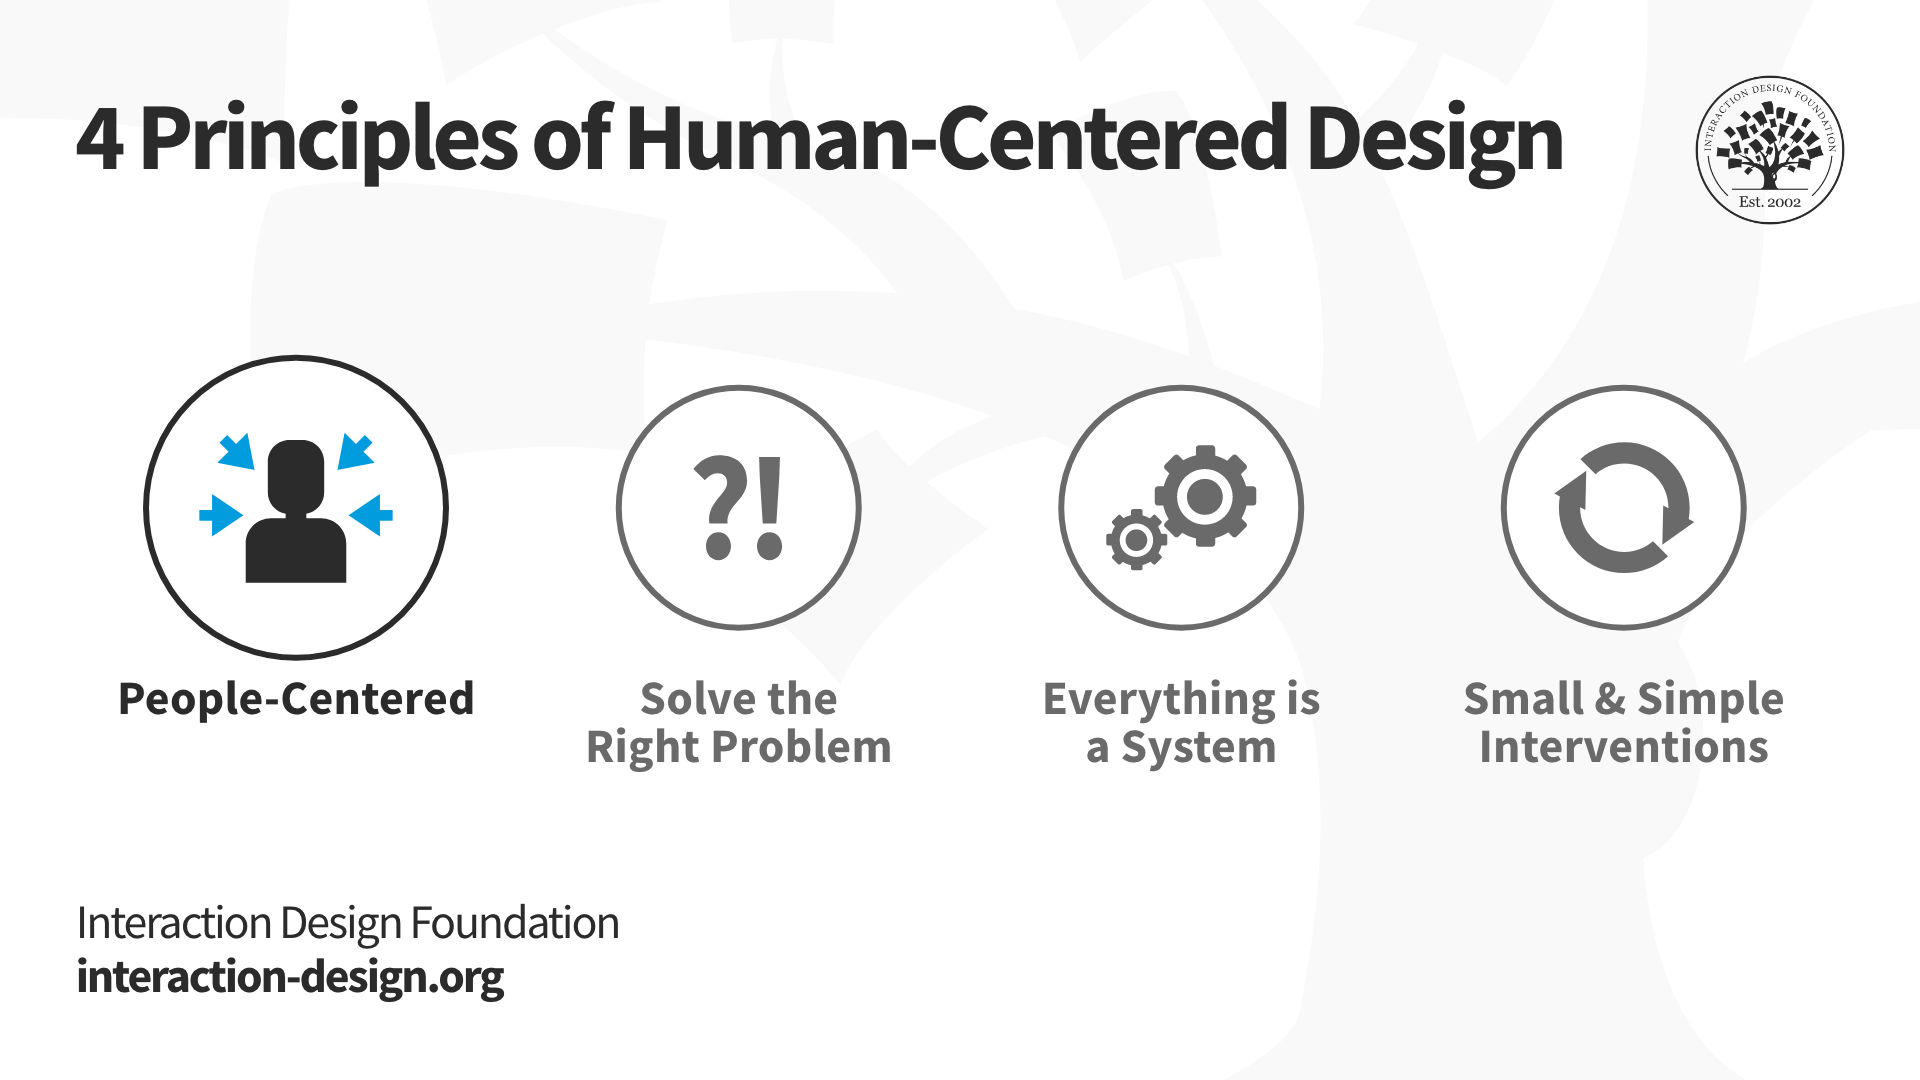 People-centred designing: 5 Why not design for the 'average' user